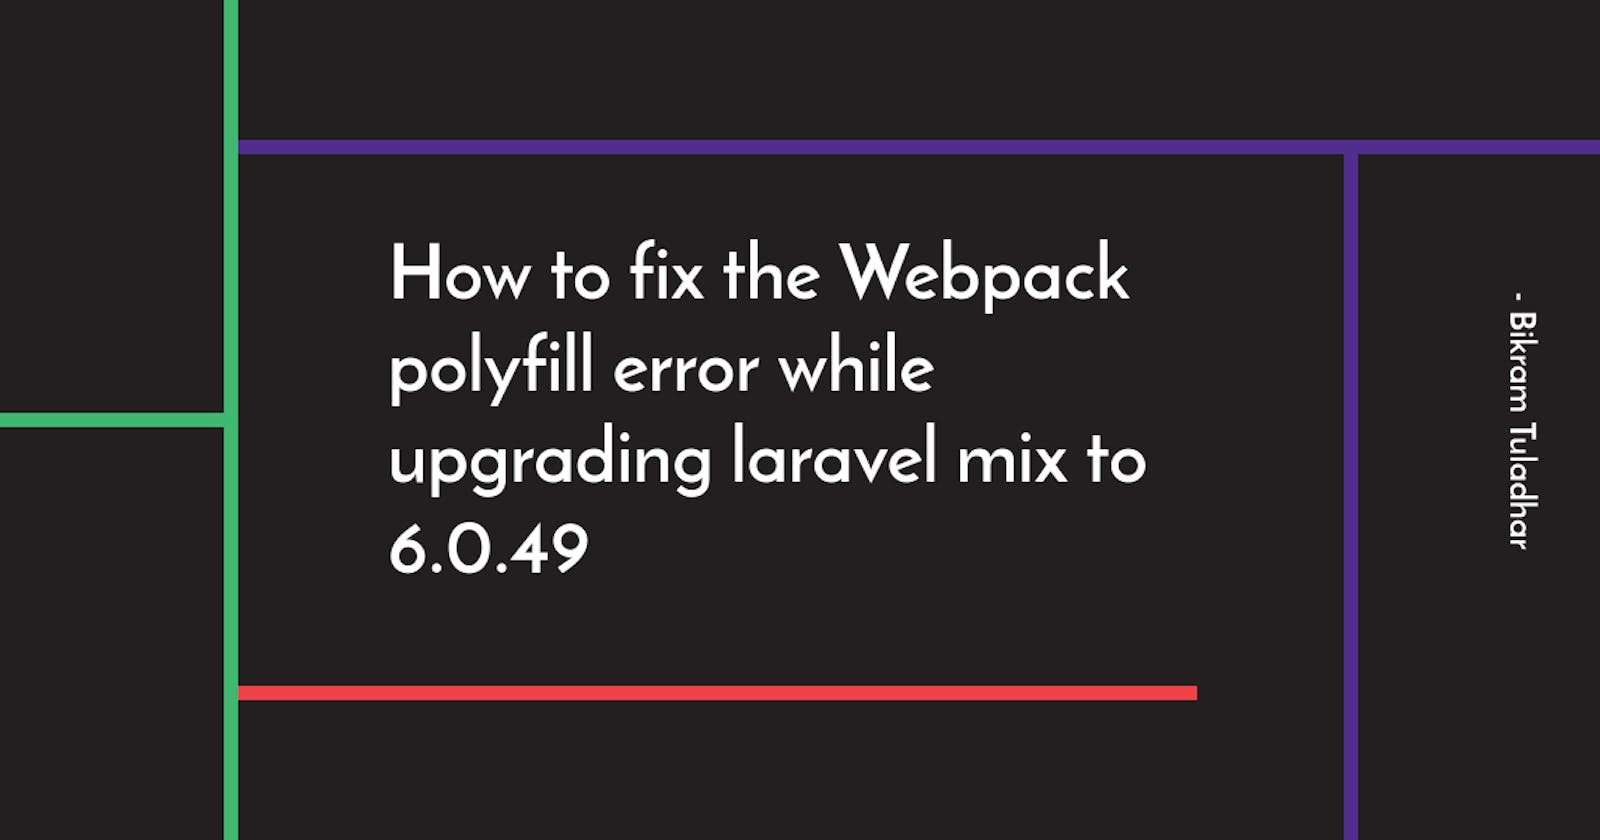 How to fix the Webpack polyfill error while upgrading laravel mix to 6.0.49